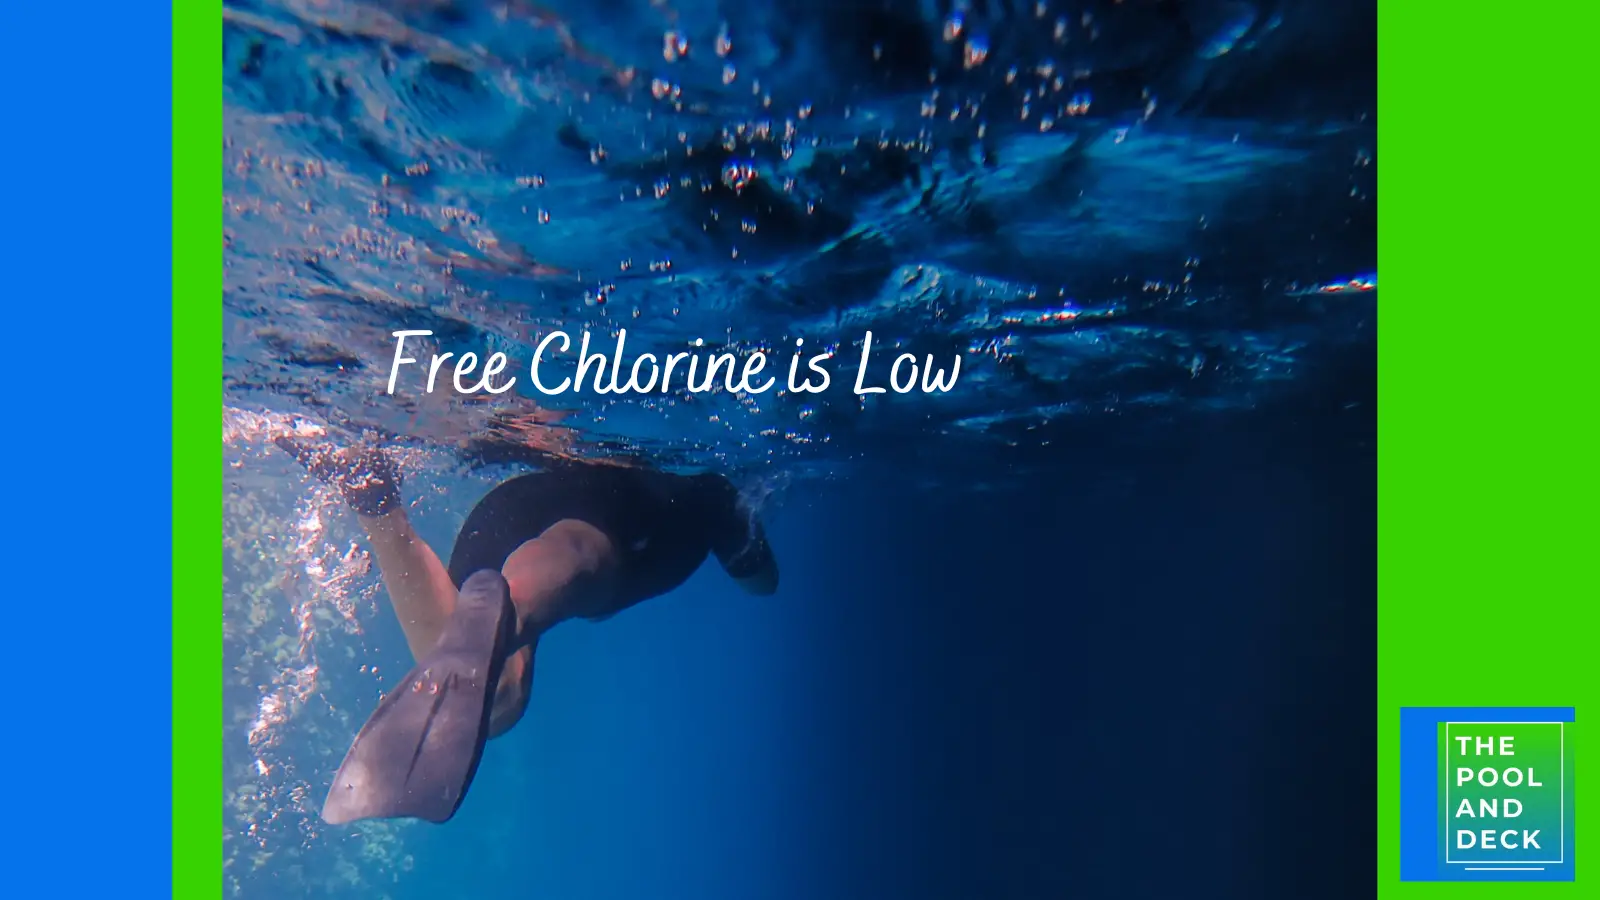 Free Chlorine is Low: Cause, Effect & Solution